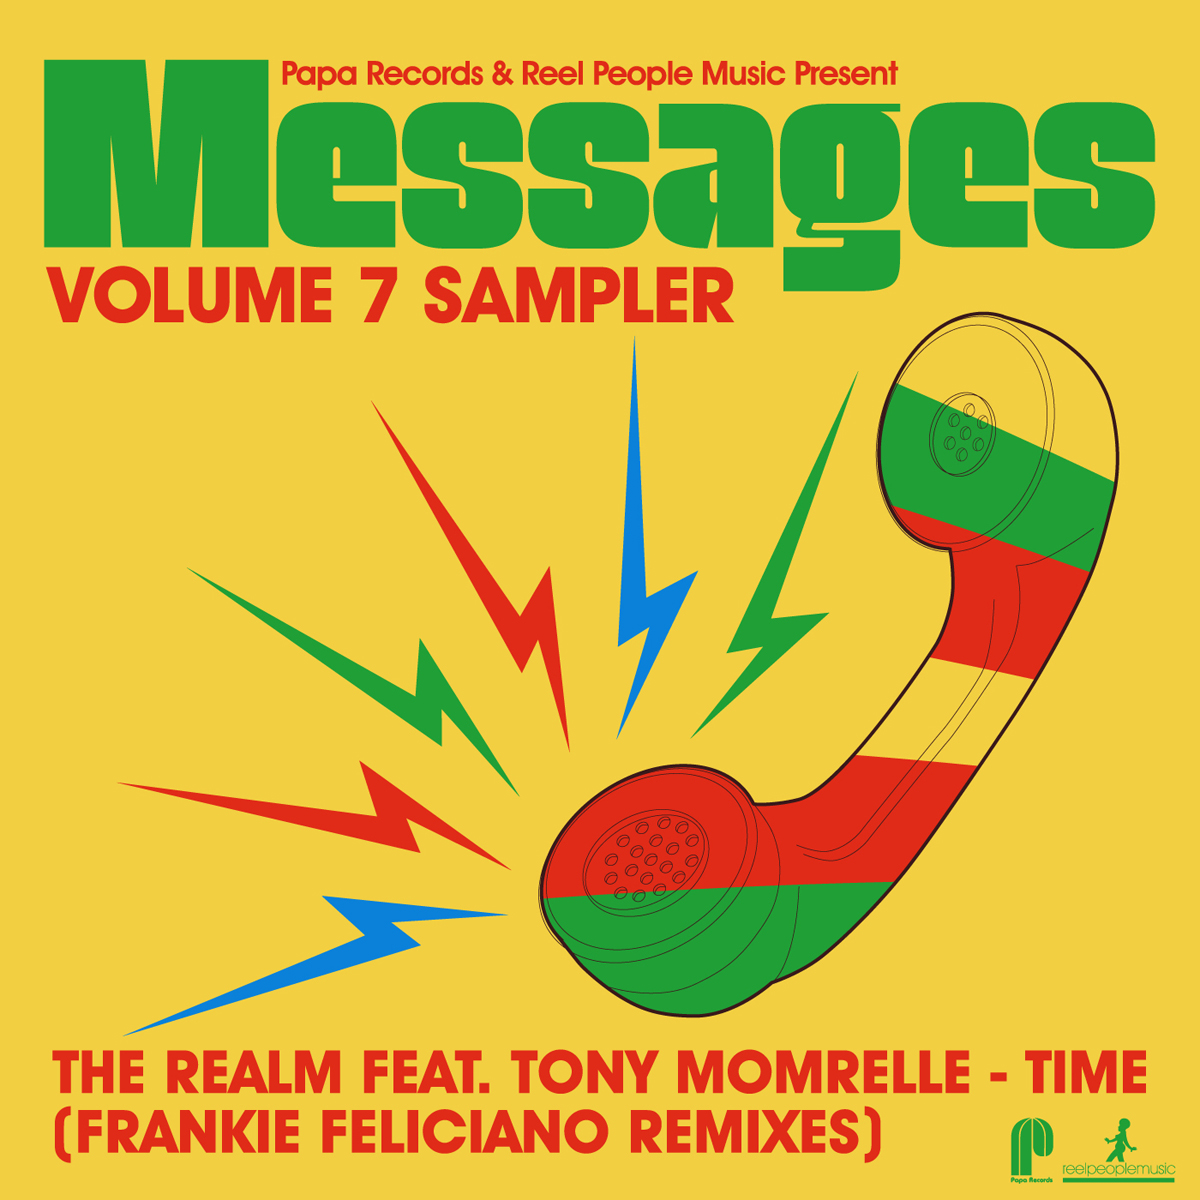 The Realm feat. Tony Momrelle - Time - Messages Vol. 7 Sampler (Frankie Feliciano Remixes)